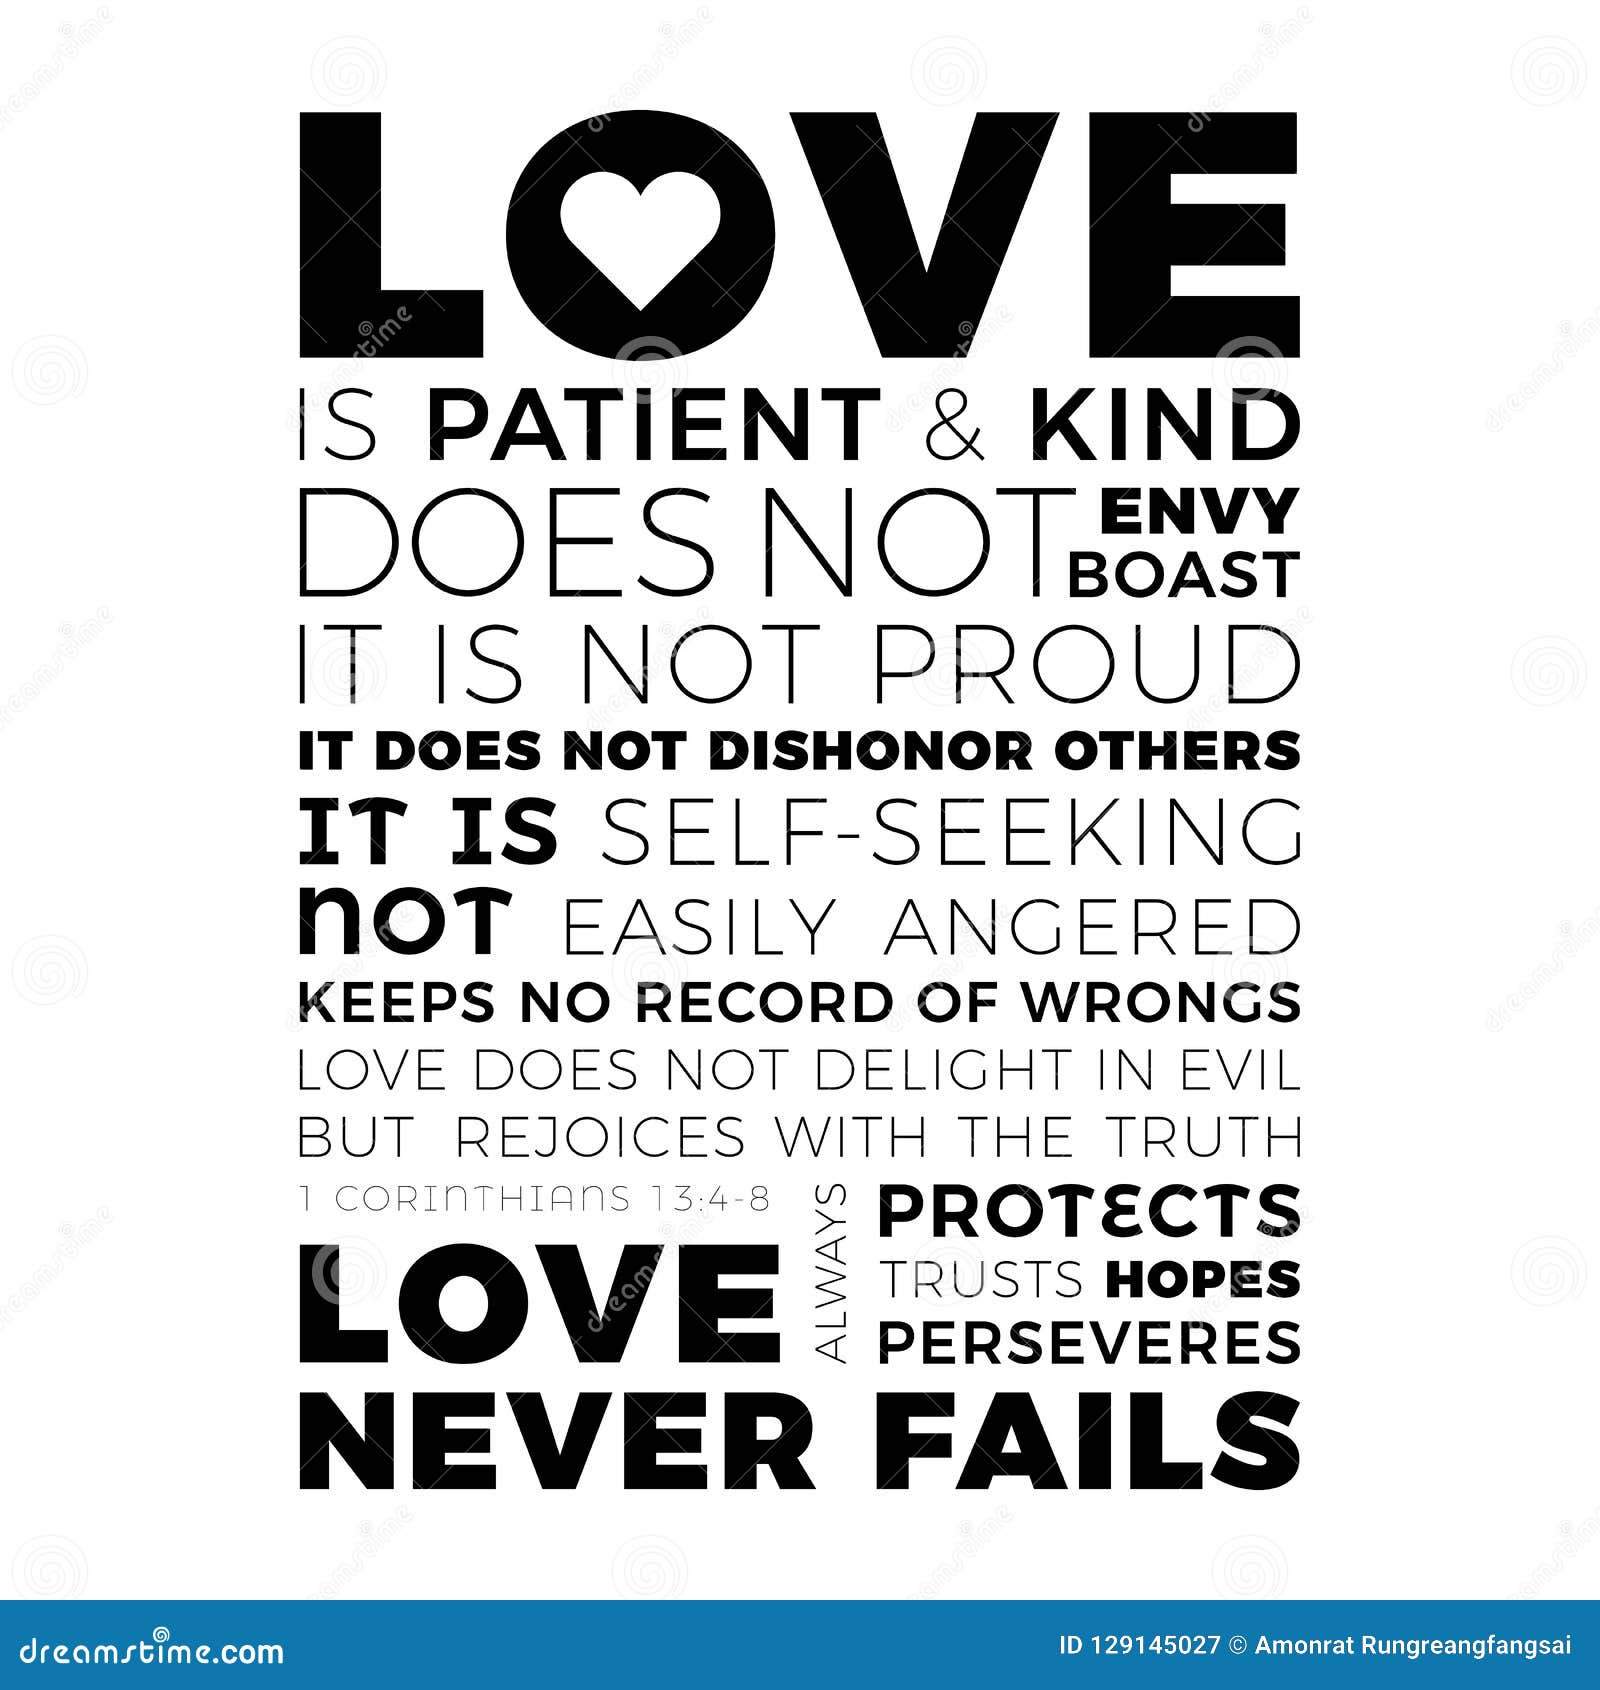 Love Never Fails - Bible Meaning Explained